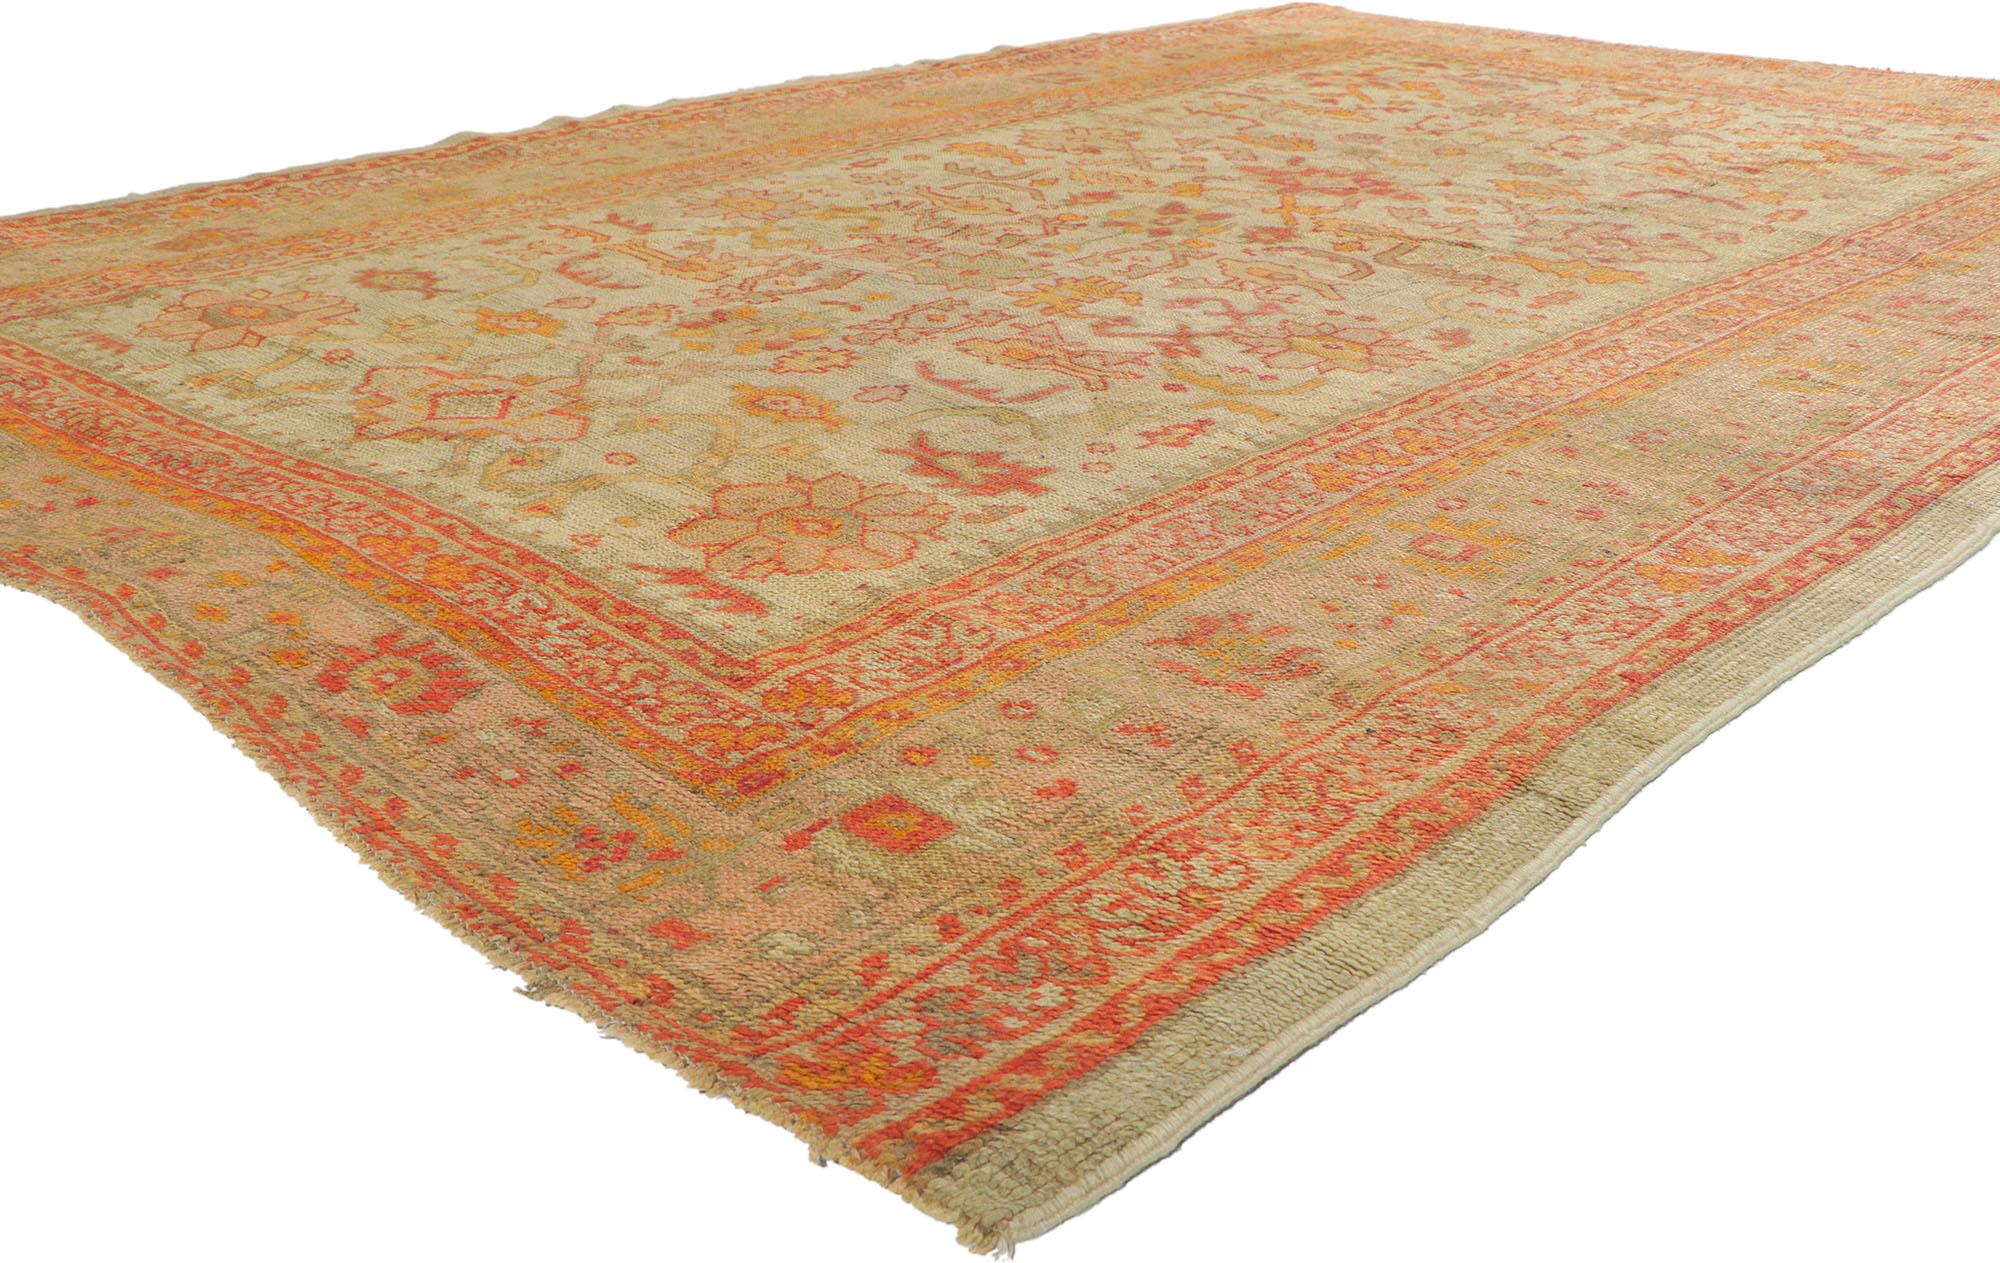 74181 Antique Turkish Oushak Area Rug with Geometric Pattern. Resplendent with traditional Turkish elements of design, this antique Oushak carpet handsomely communicates some of the finer points of classical Turkish rug design. The antique Oushak